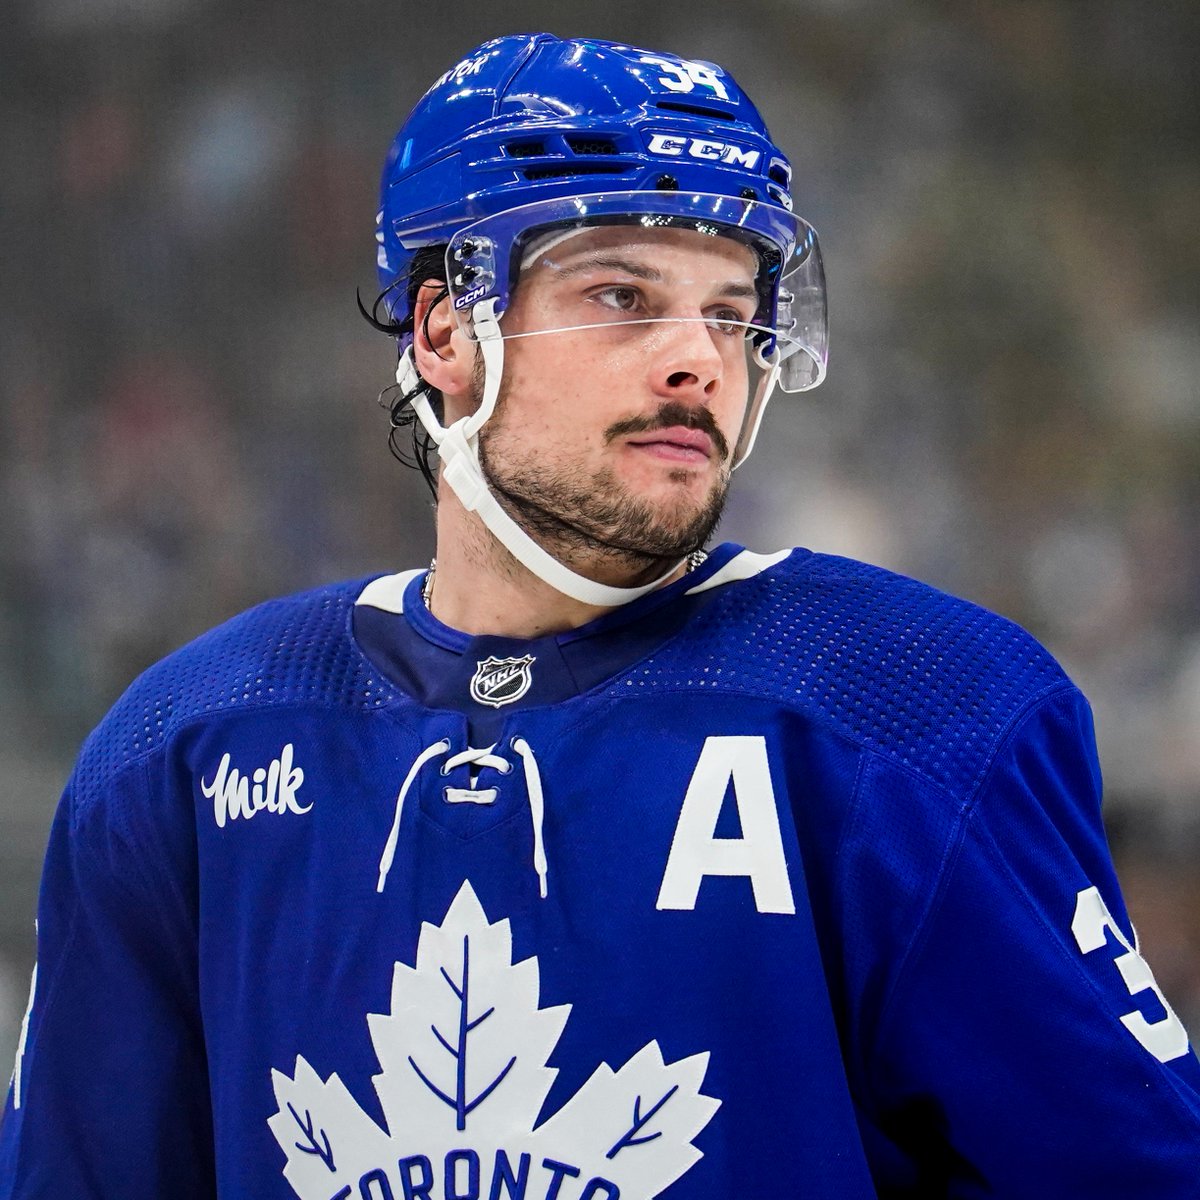 Auston Matthews is OUT for Game 6, per Sheldon Keefe.